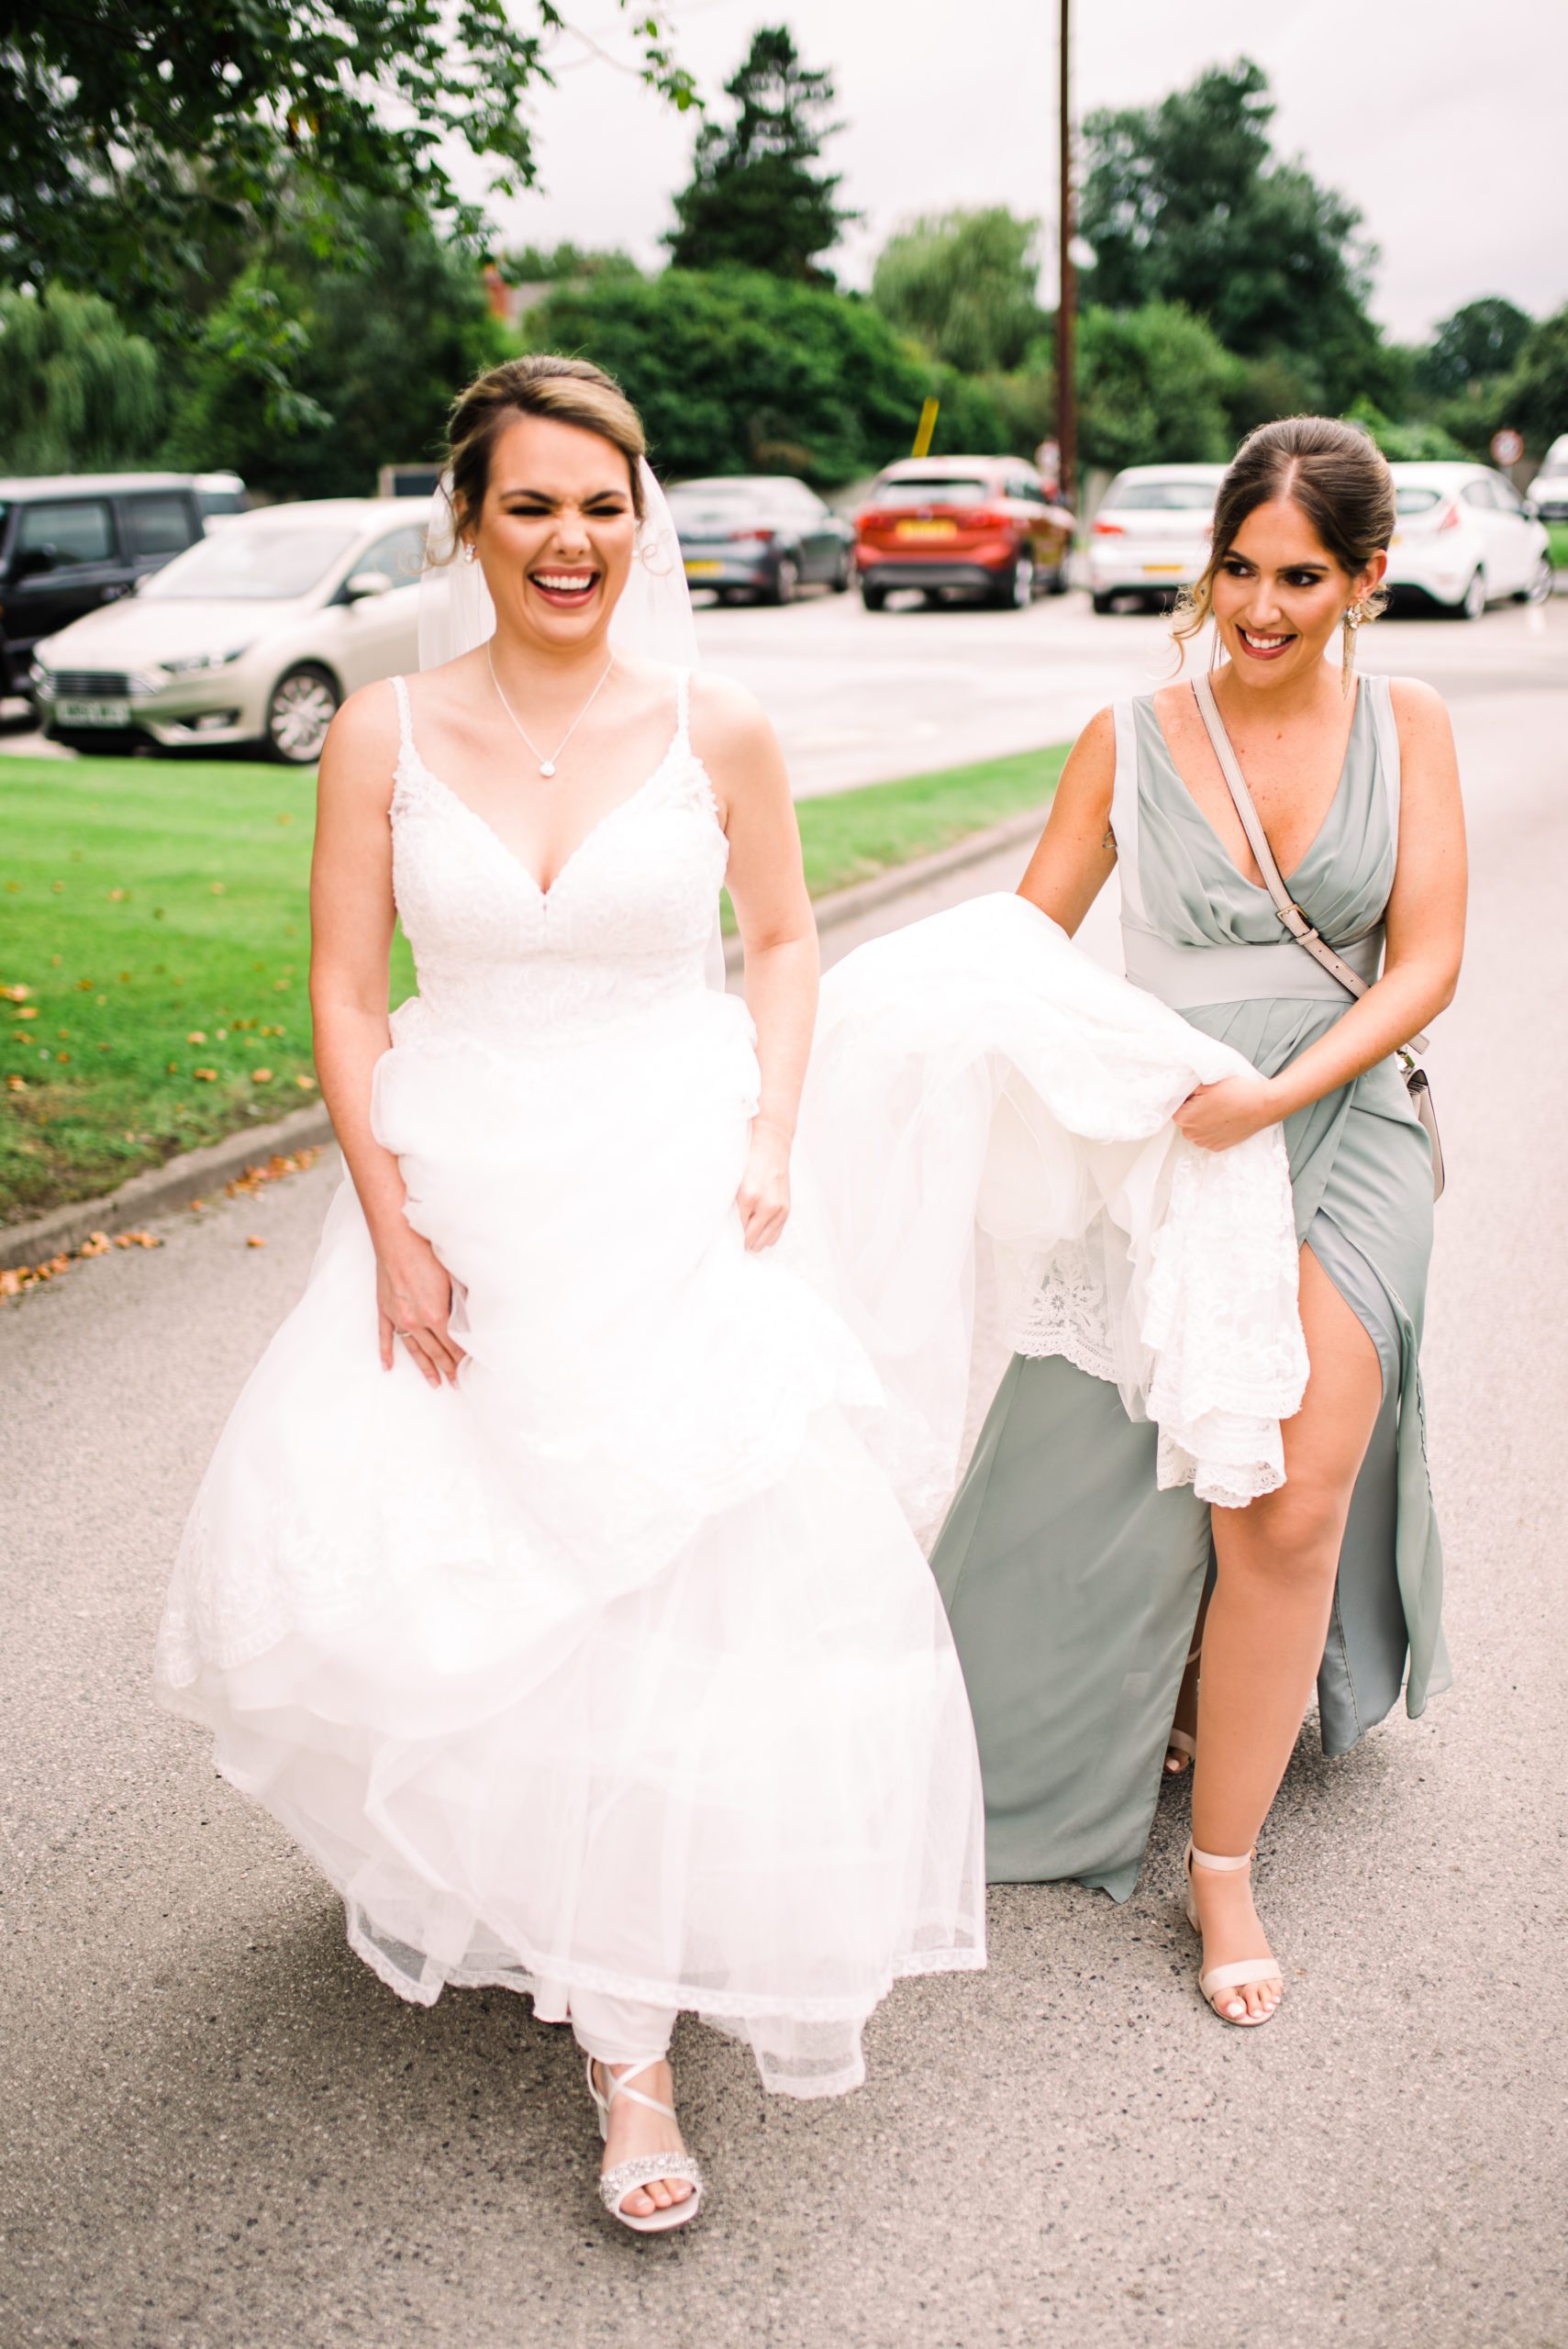 Bride walks and laughs as bridesmaid carries her train behind her